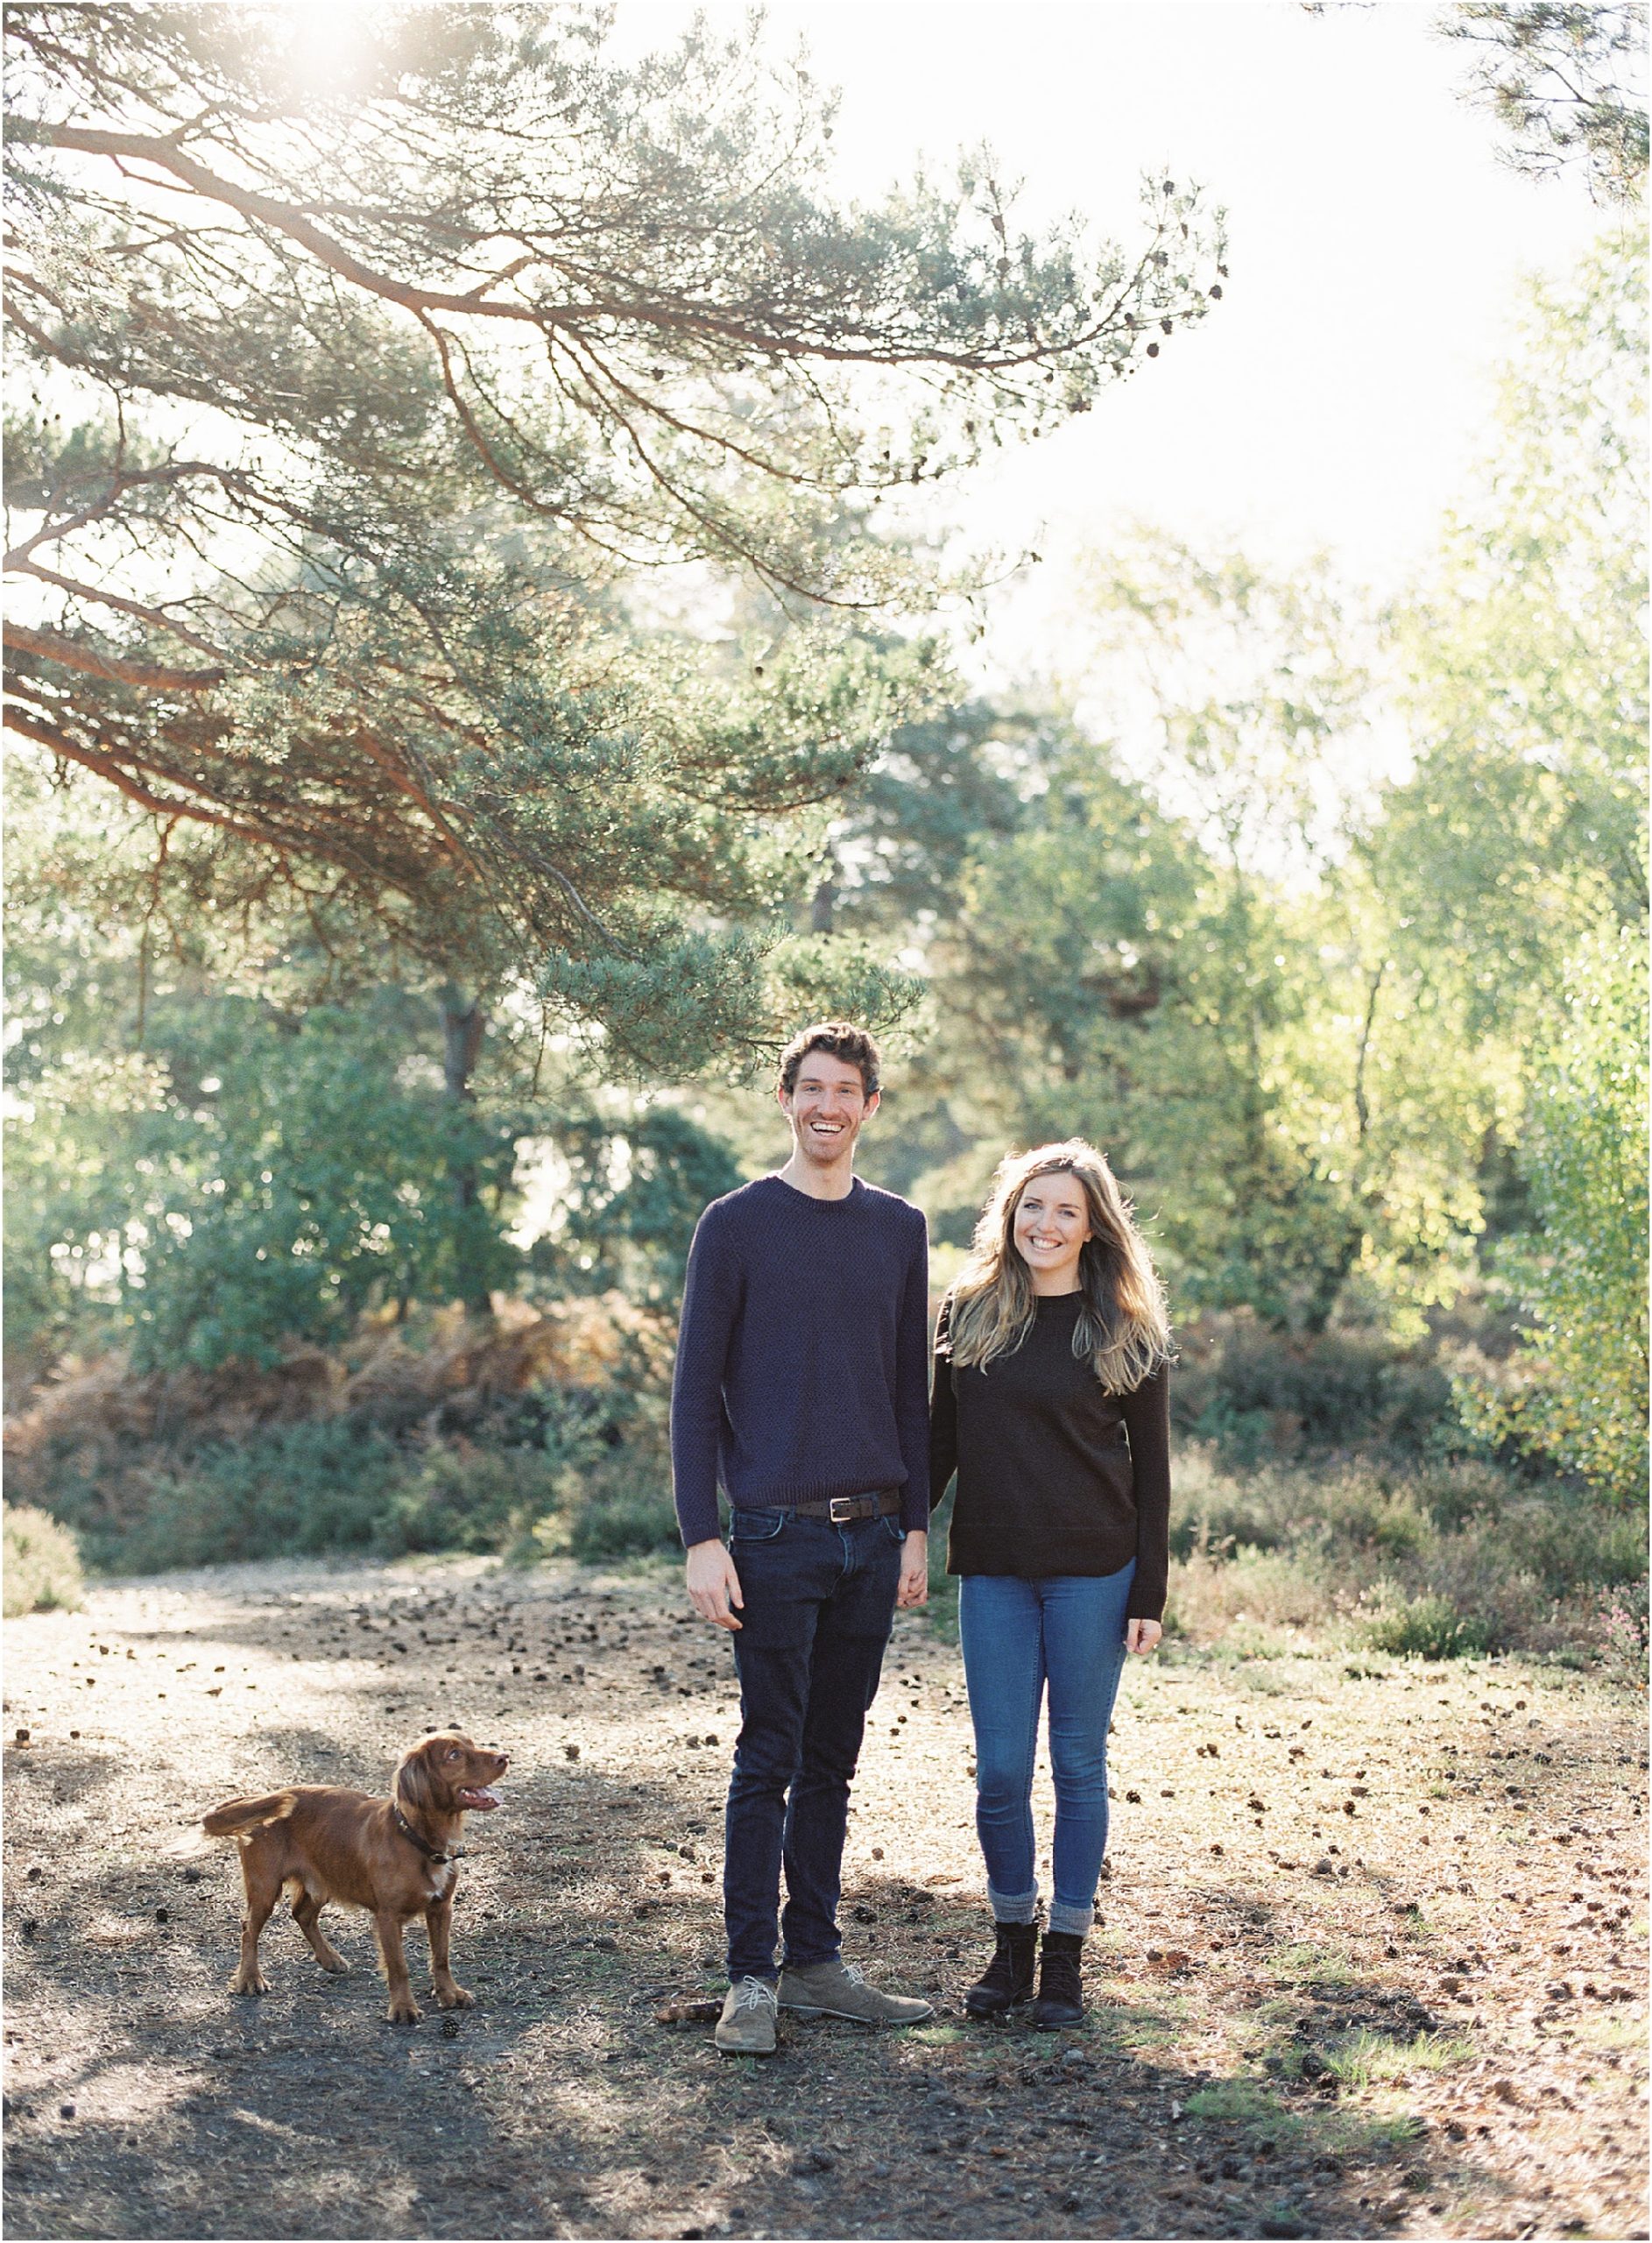 Engaged couple with their dog smiling at the camera. Captured on film by Camilla Arnhold Photography